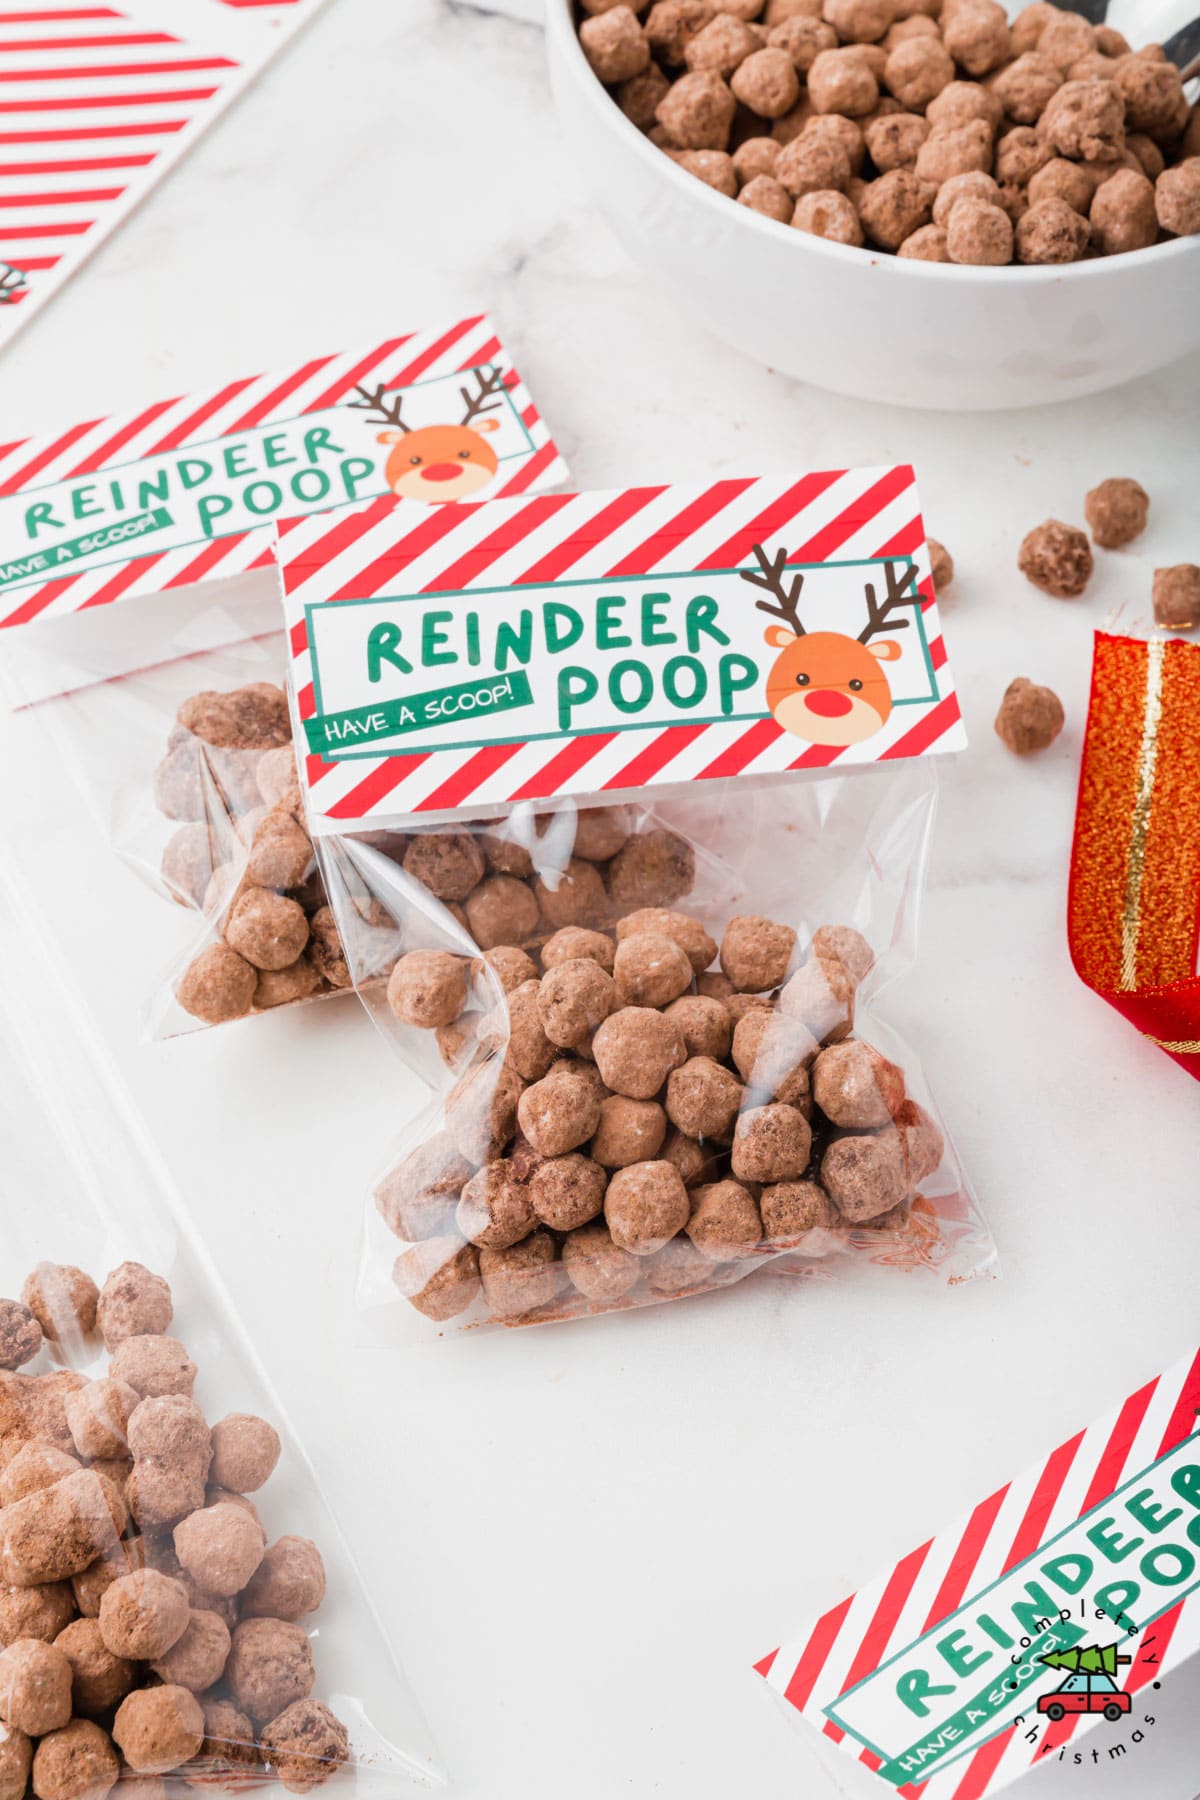 Two bags of reindeer poop dessert with holiday bag topper.